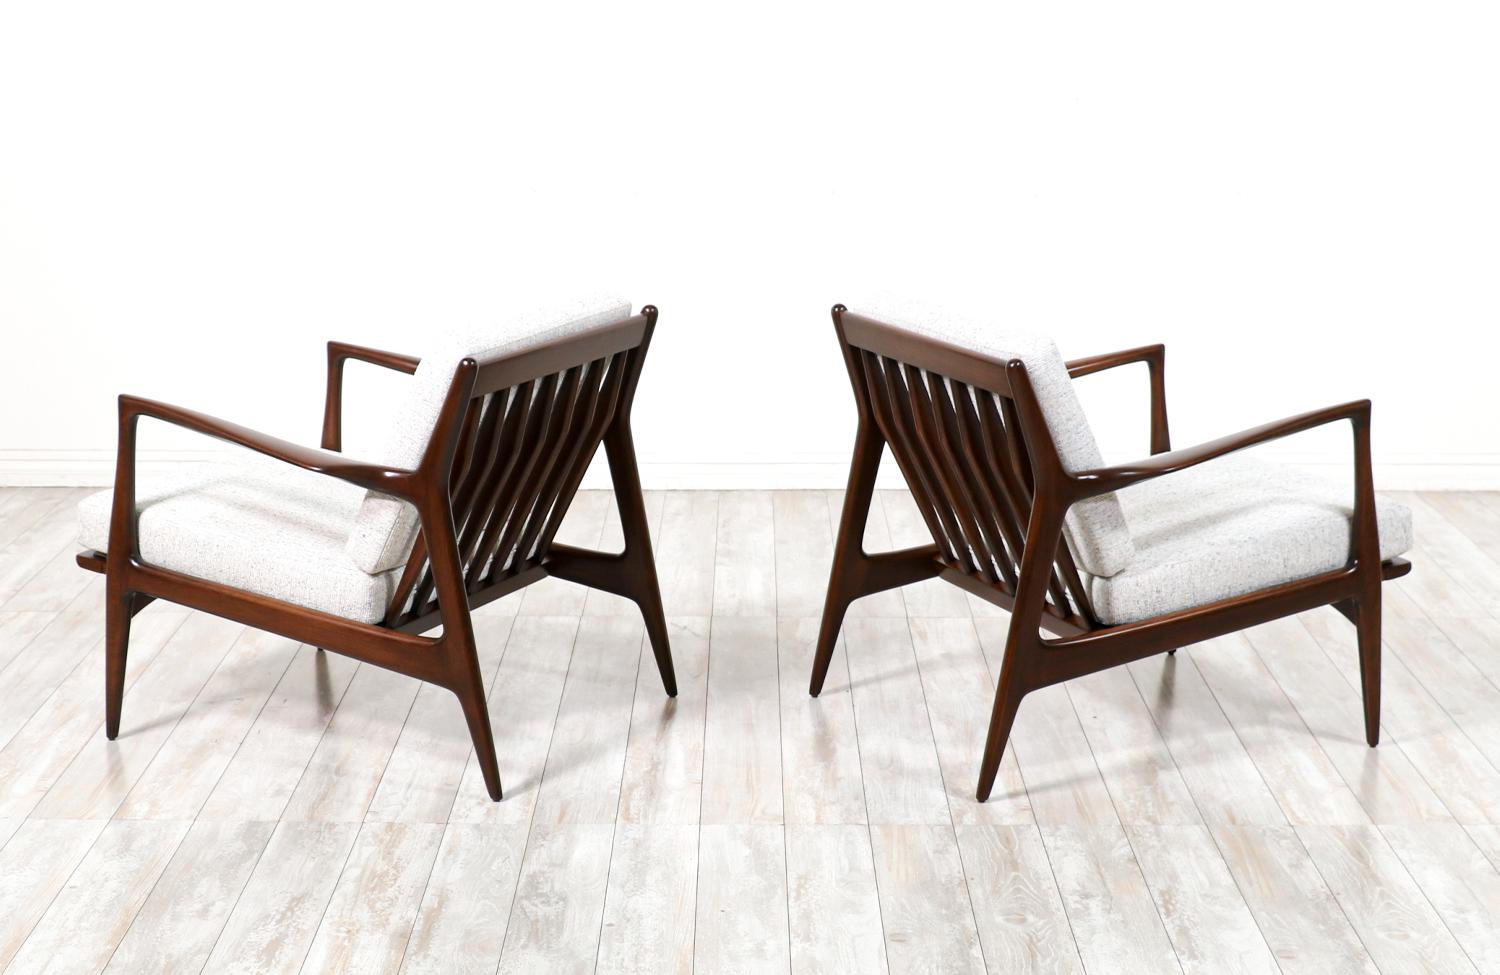 Pair of Danish Modern Sculpted Lounge Chairs by Ib Kofod-Larsen In Excellent Condition For Sale In Los Angeles, CA